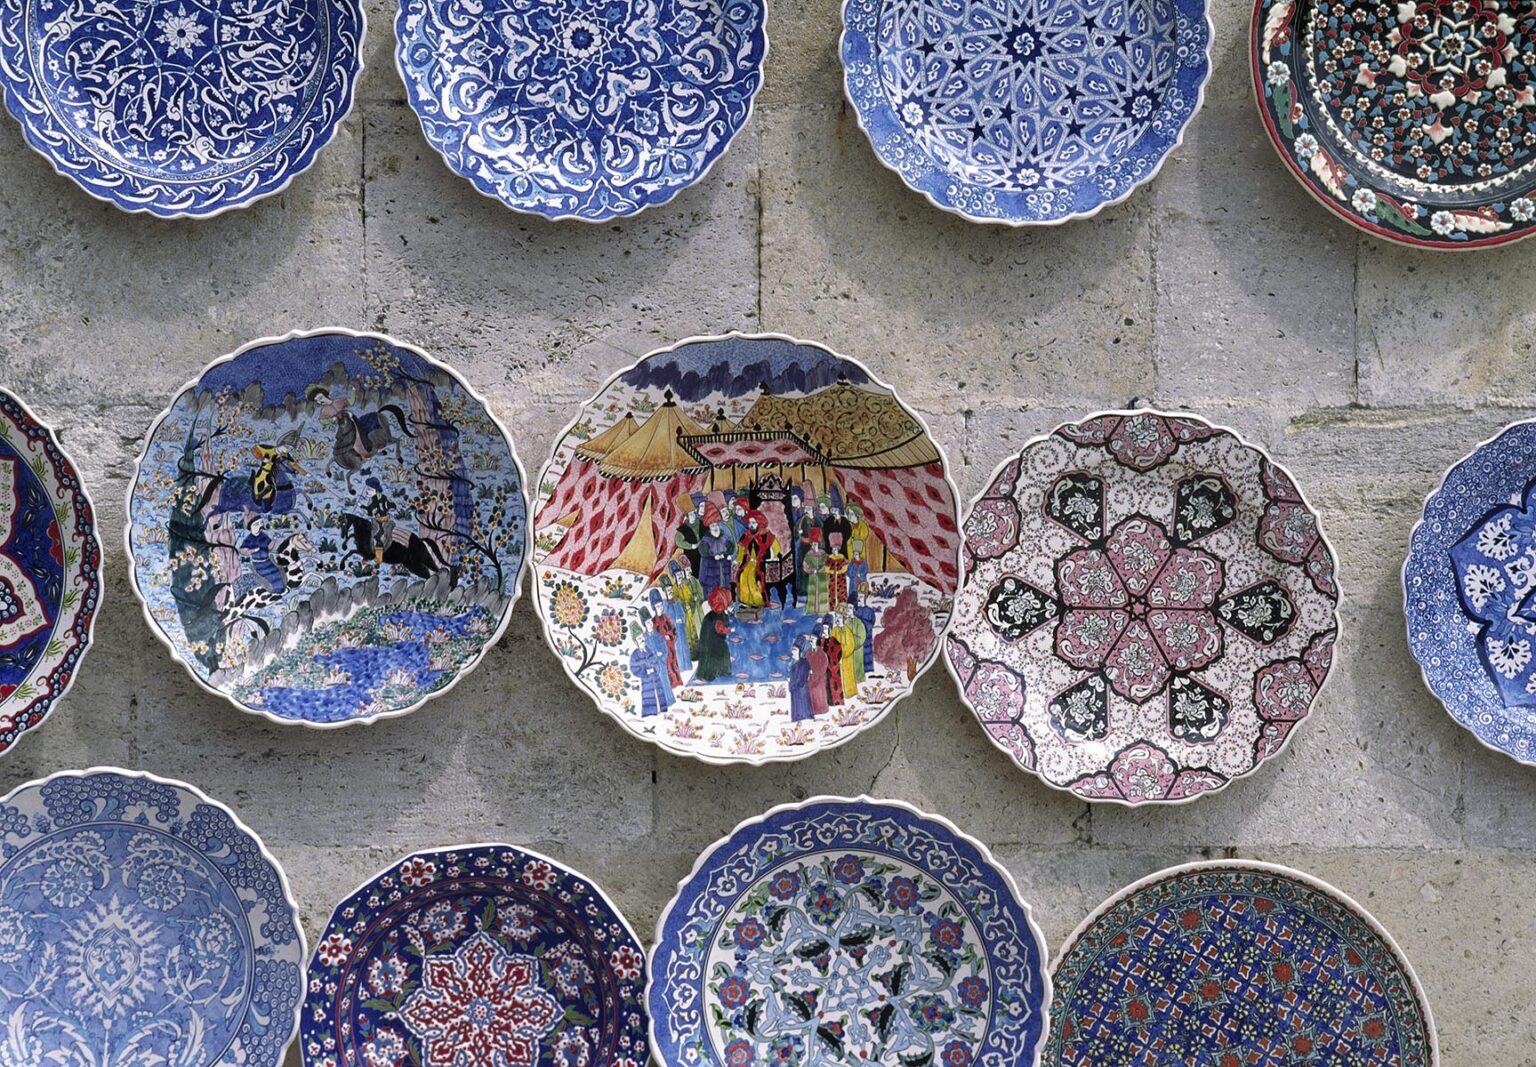 Hand painted plates for sale - Istanbul, Turkey